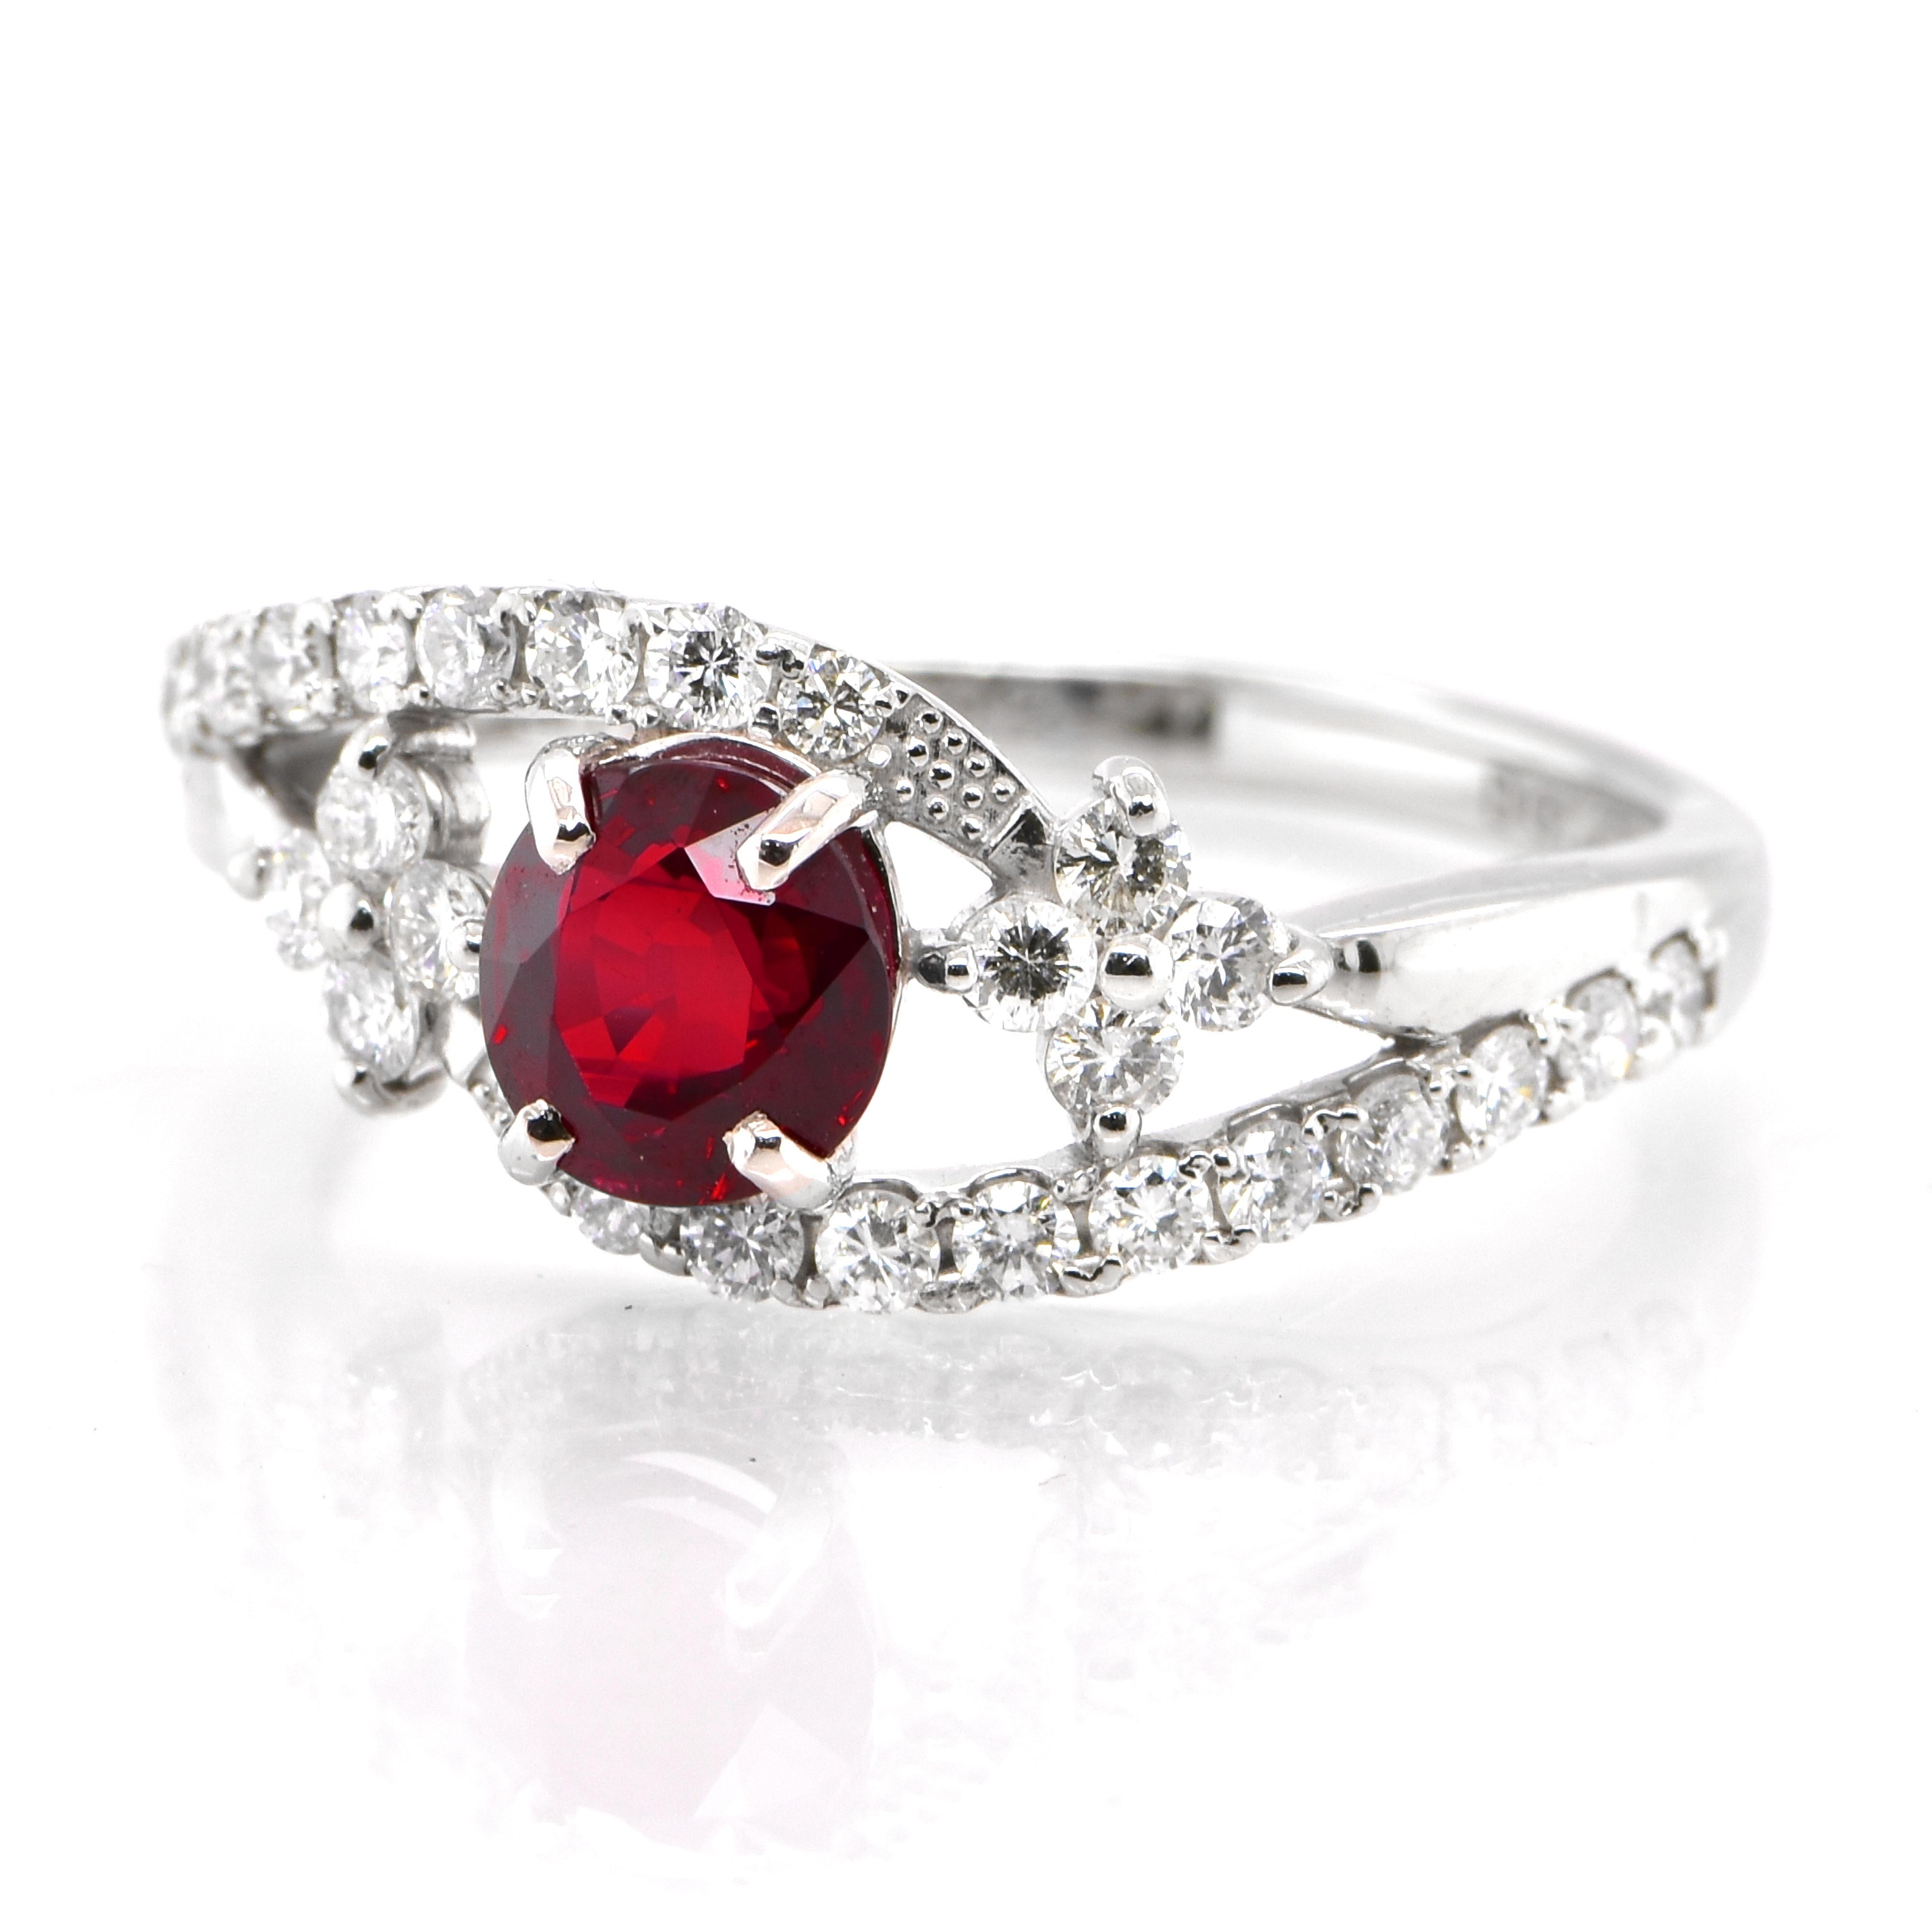 A beautiful Ring set in Platinum featuring a 1.032 Carat Natural Ruby and 0.47 Carat Diamonds. Rubies are referred to as 